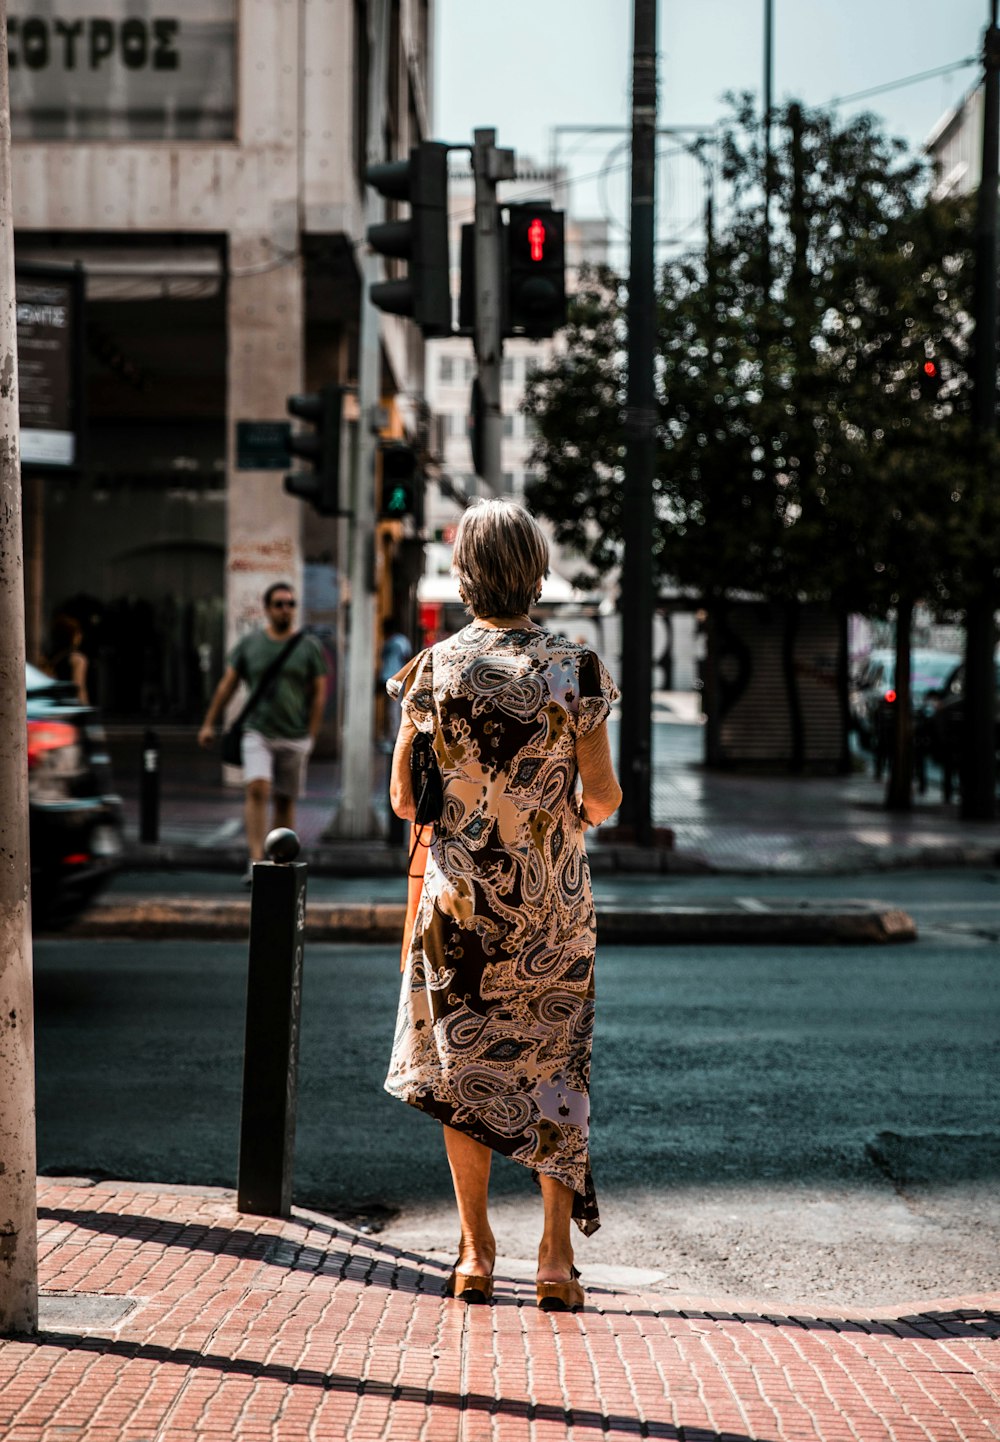 woman in yellow and black floral dress standing on sidewalk during daytime